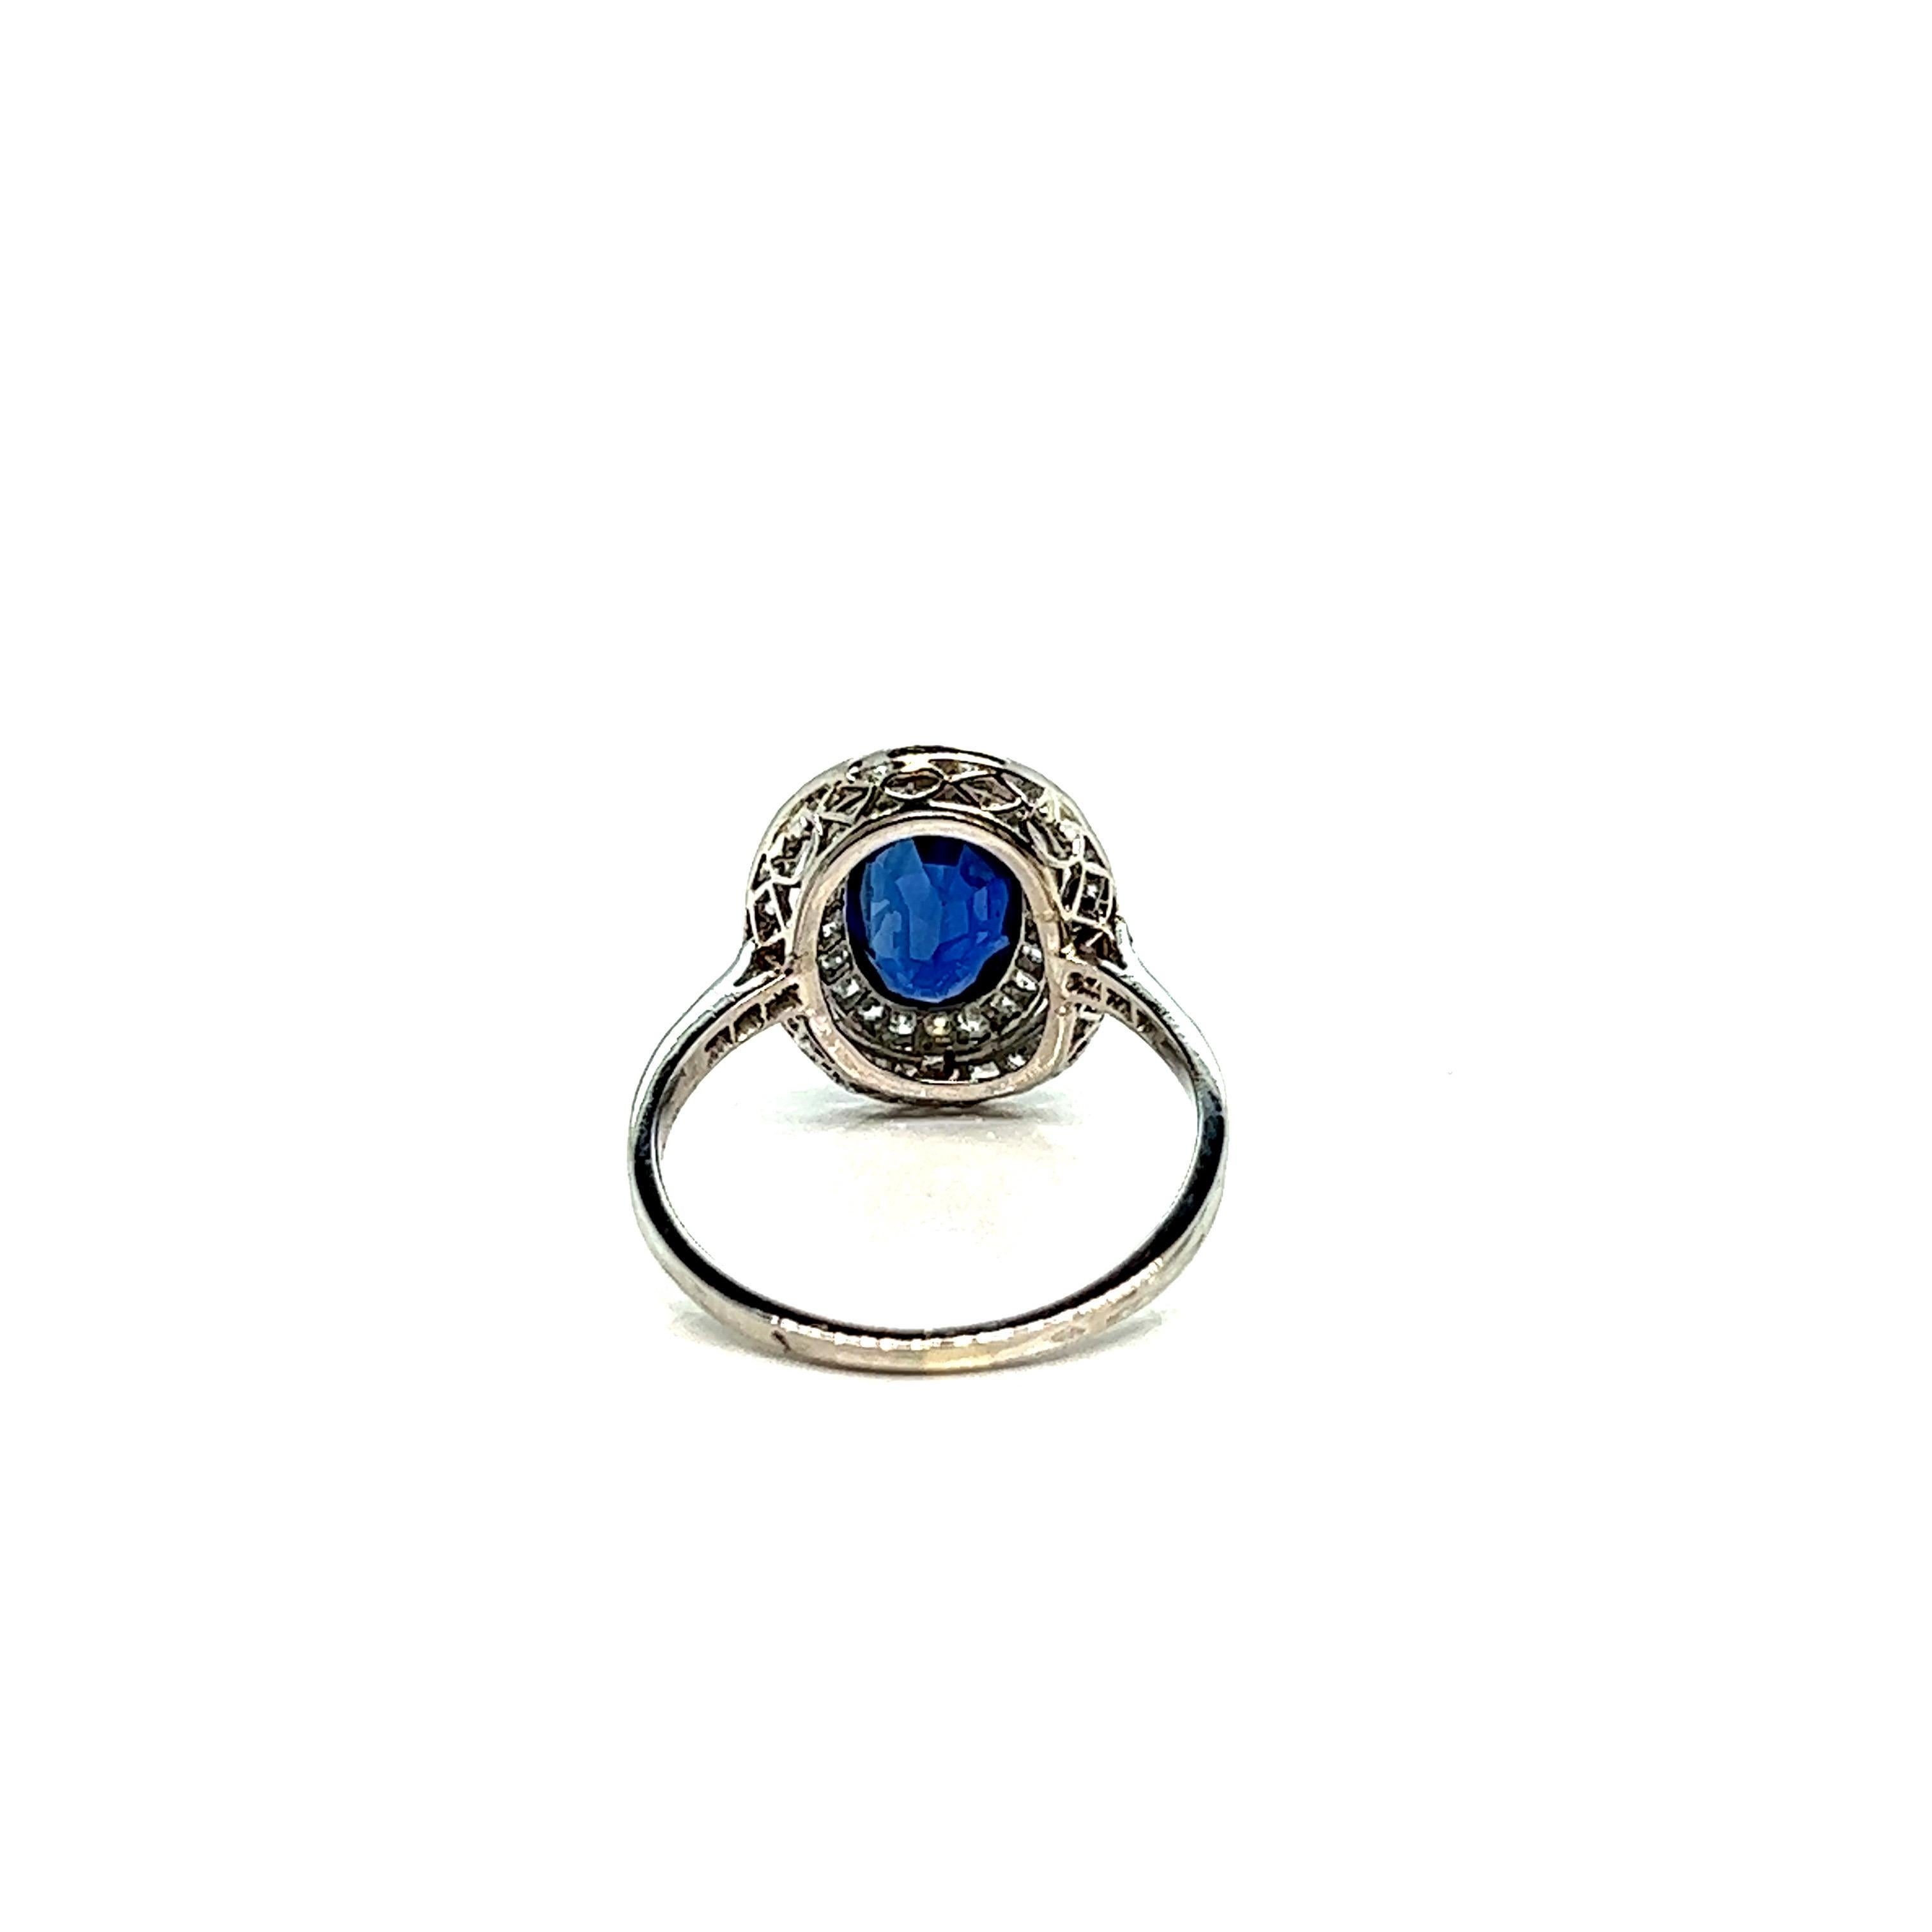 Vintage French Engagement Oval Cluster Ring Blue Sapphire 2.5C Platinum Diamonds 1